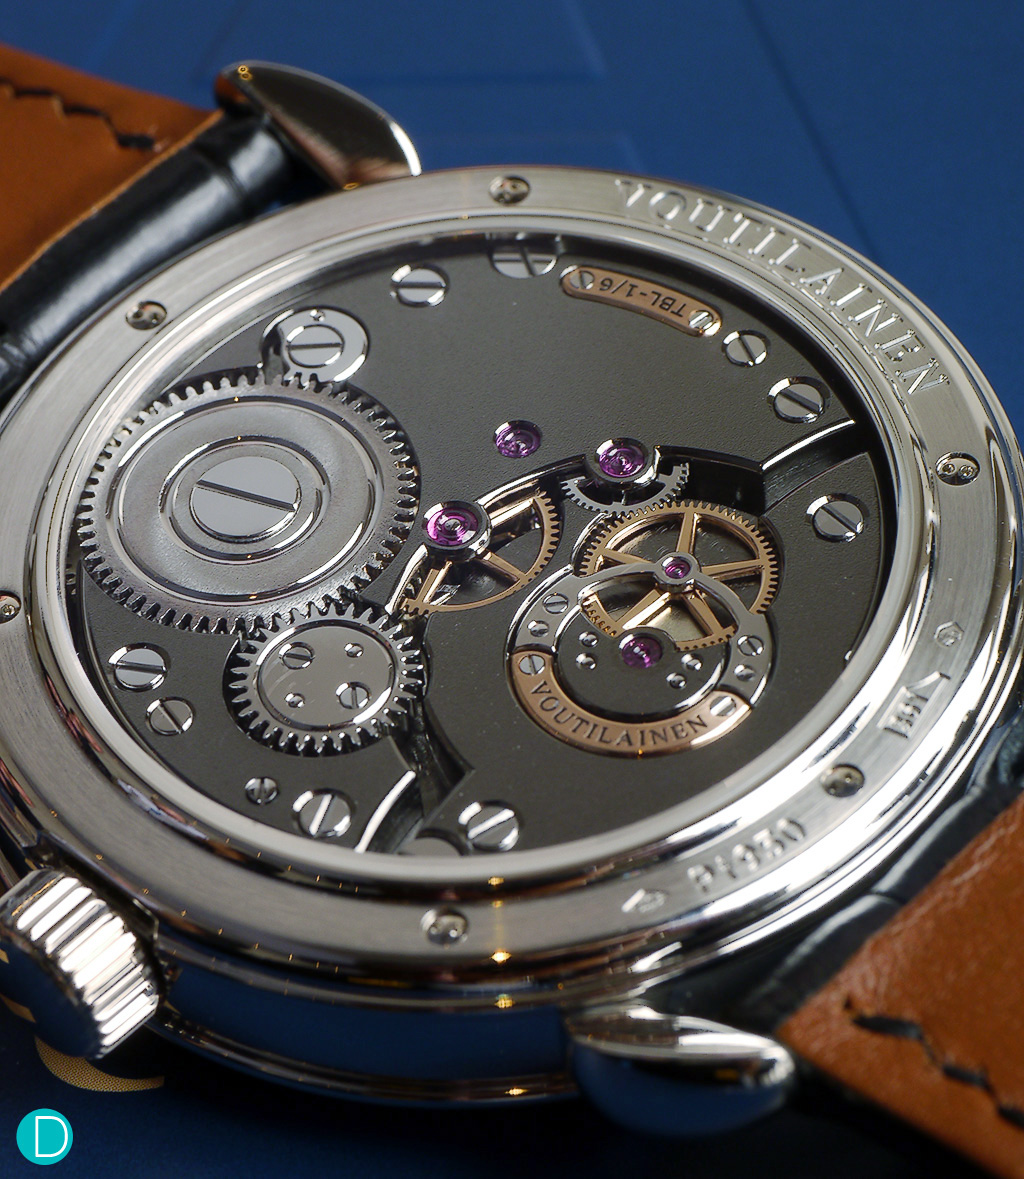 Movement of the Voutilainen Tourbillon-6. Made in German Silver, but which has been heat treated. 